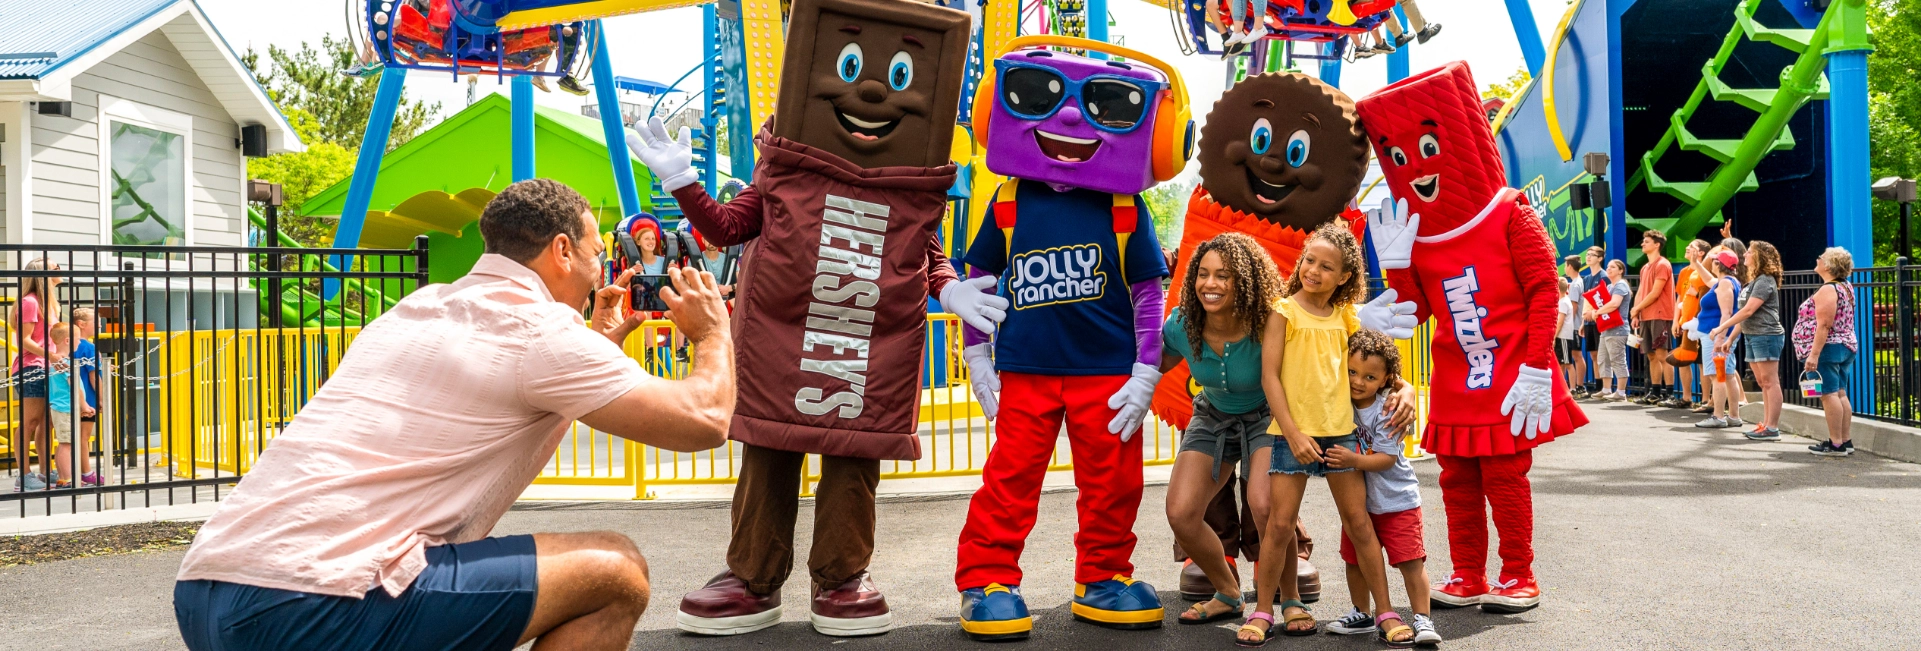 Family taking pictures with the Hersheypark mascots